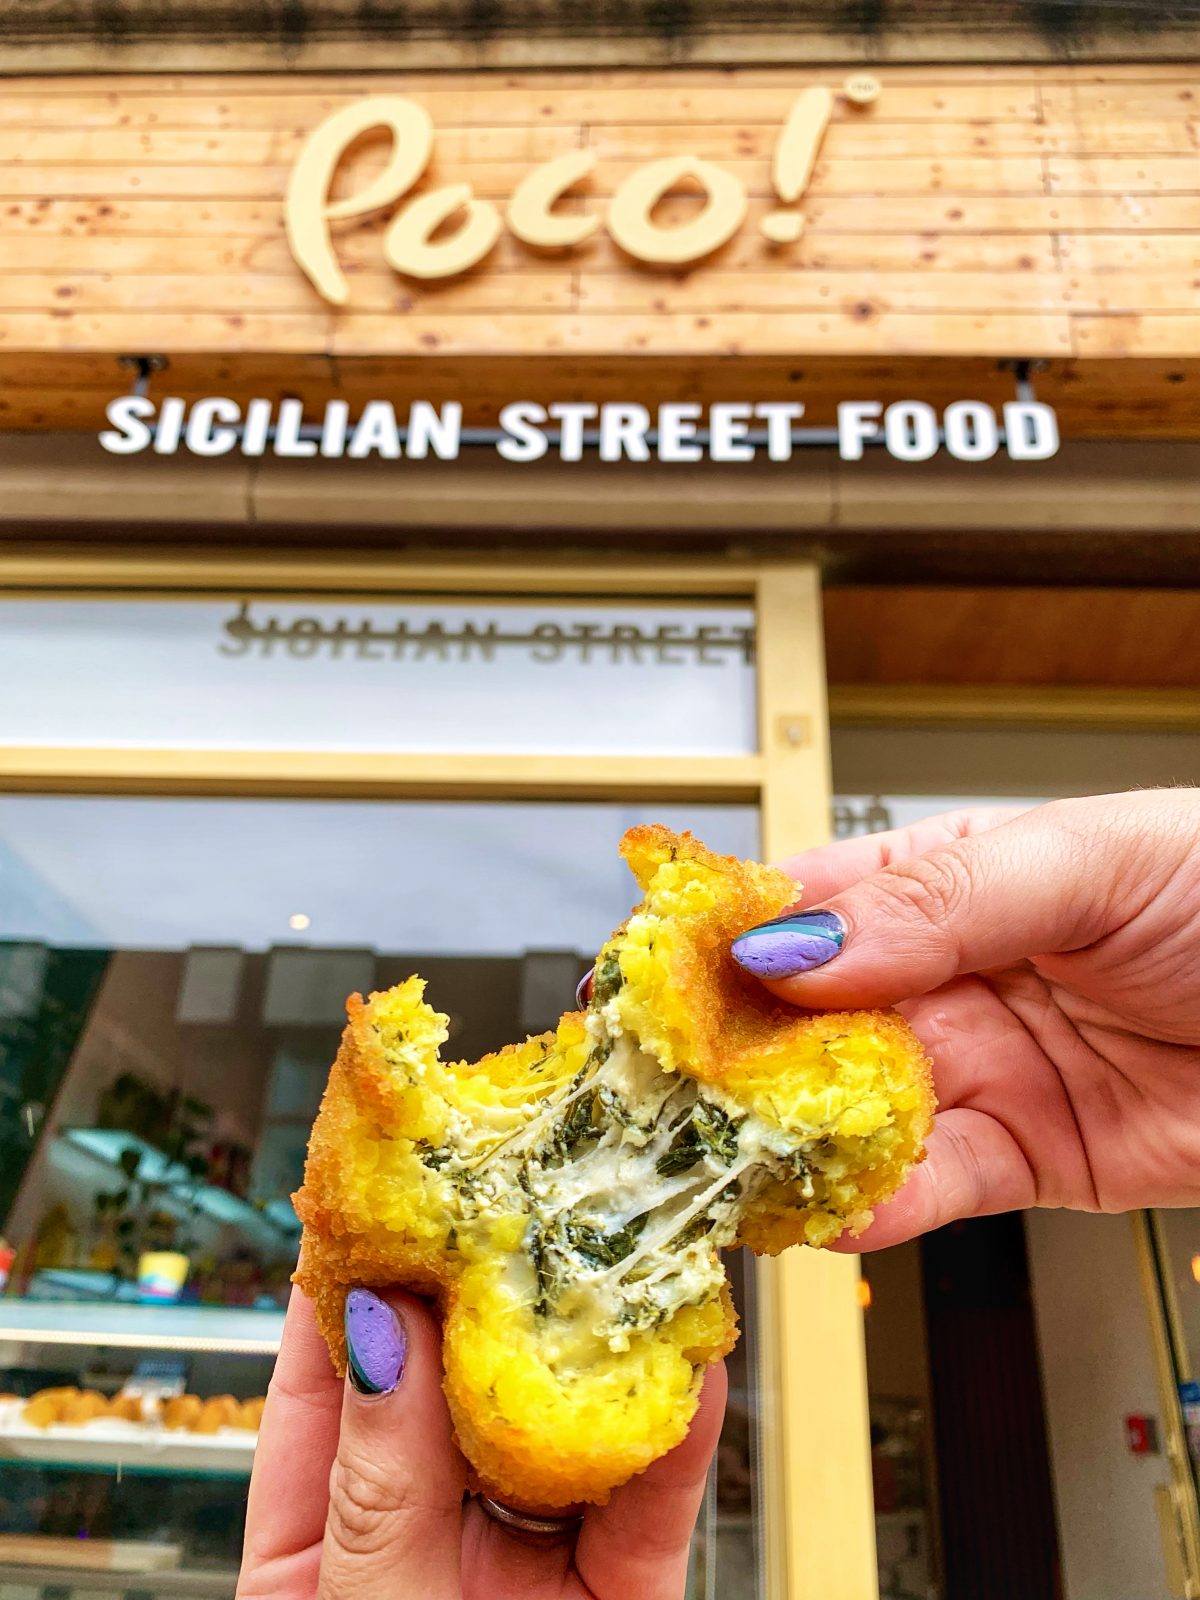 Spinach and ricotta arancini being pulled apart outside a POCO store.